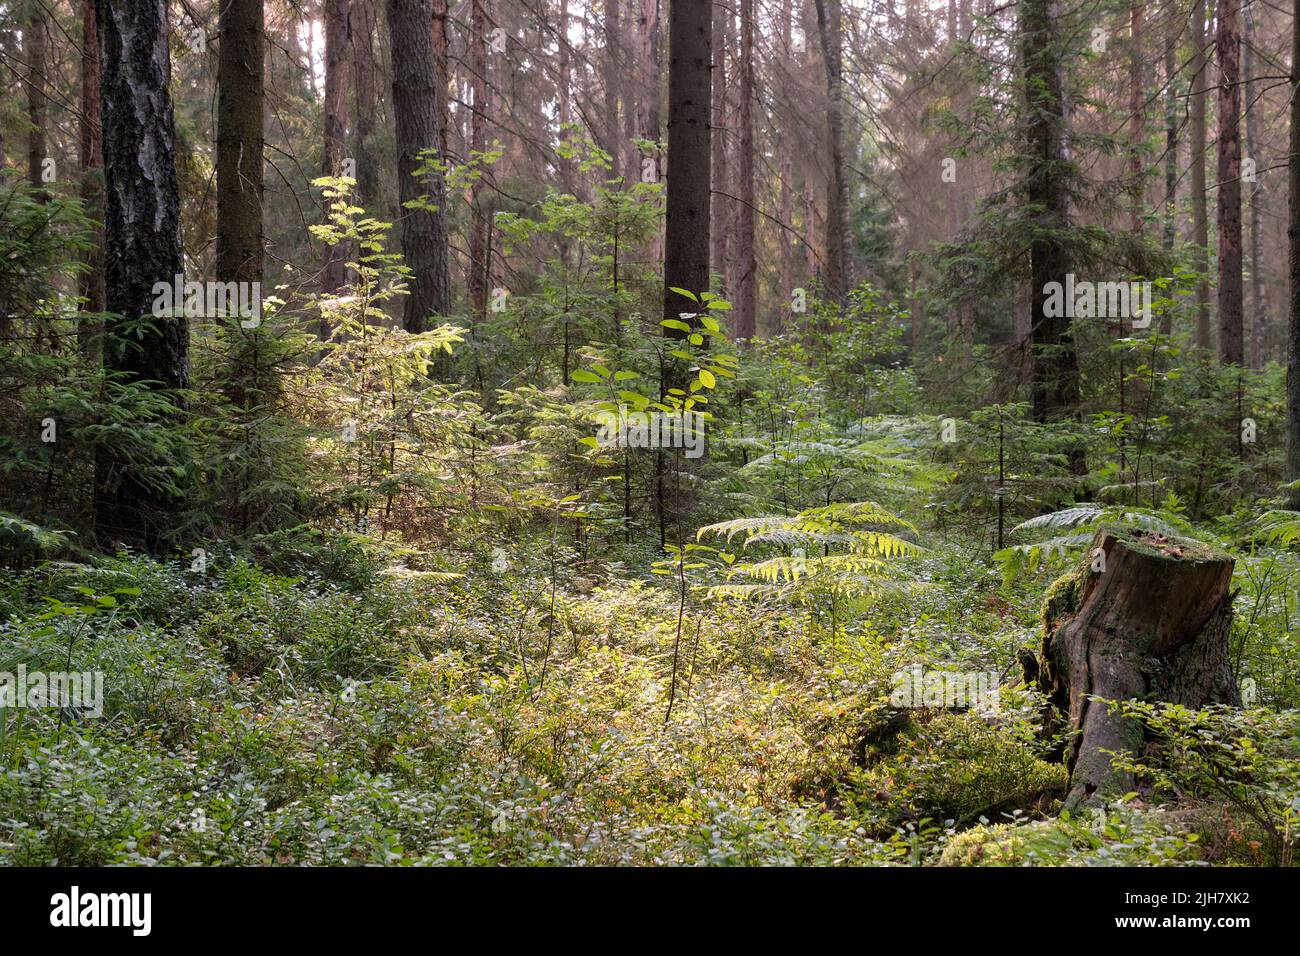 oniferous stand in sunrise with pine and spruce and moss covered forest floor,Bialowieza Forest,Poland,Europ Stock Photo